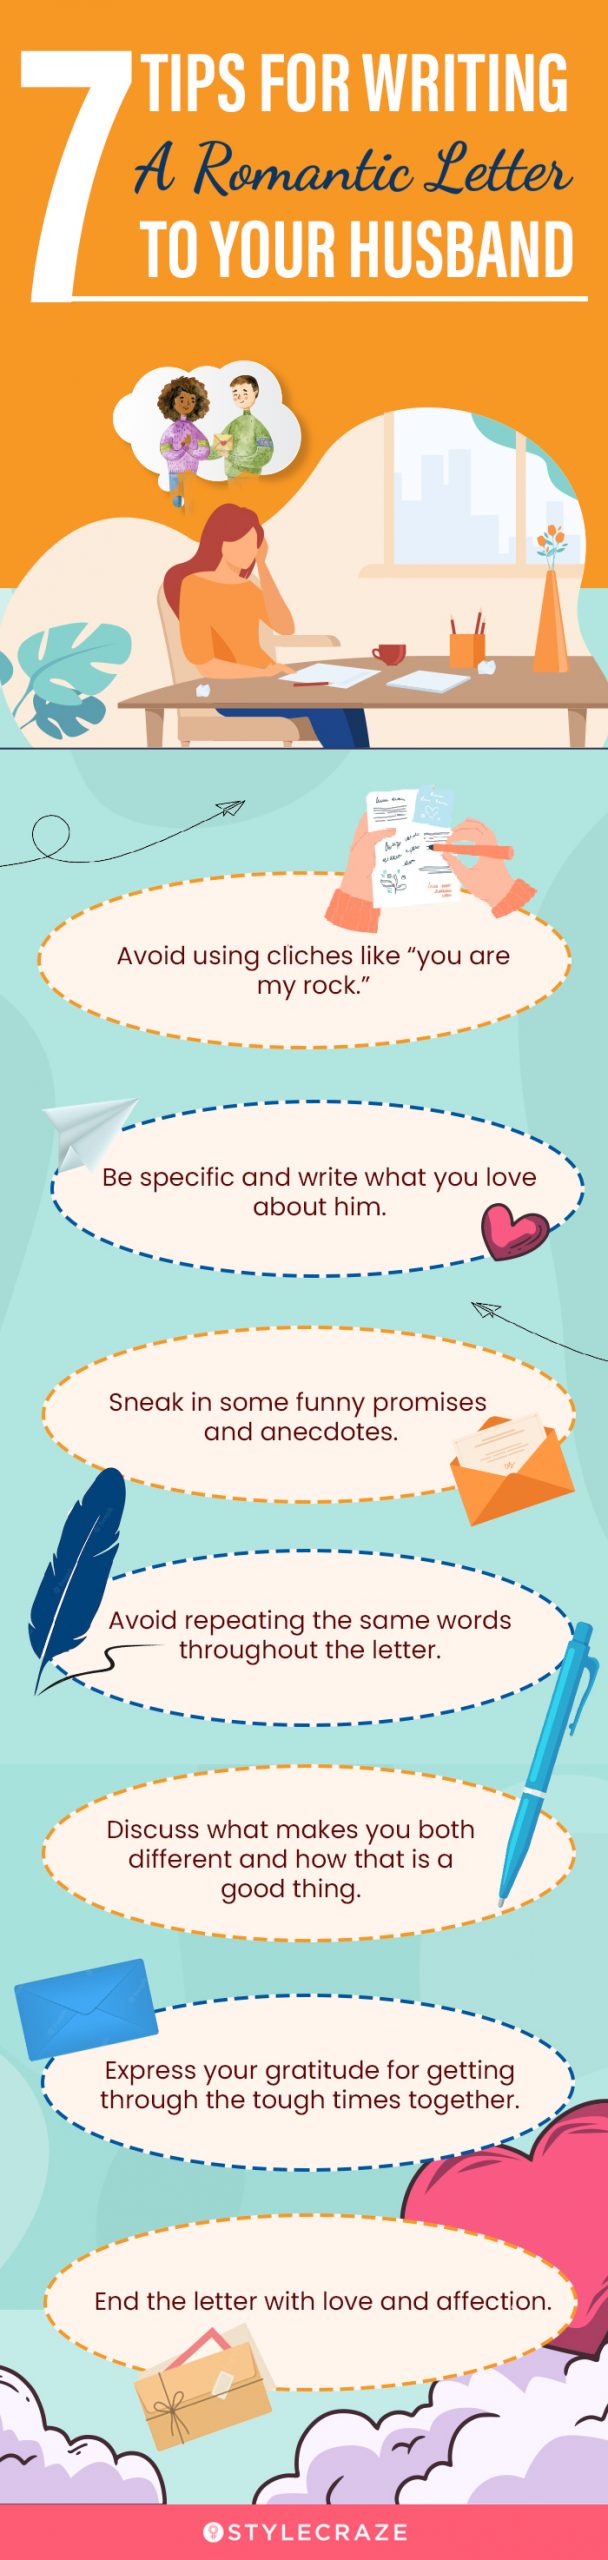 7tips for writing a romantic letter to your husband (infographic)